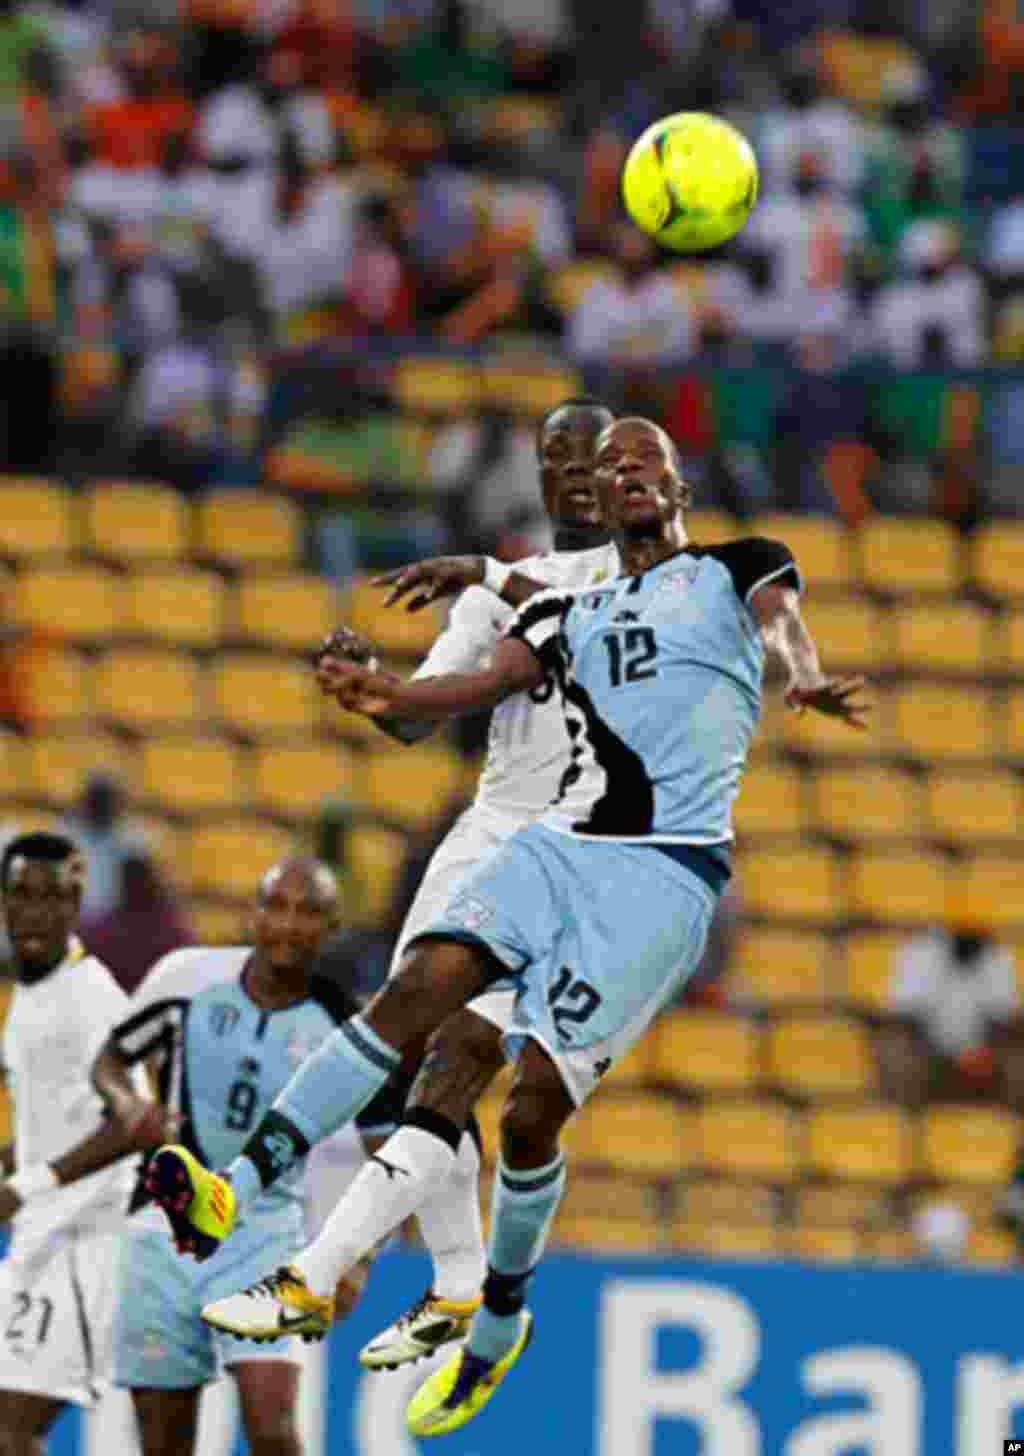 Botswana's Patrick Motsepe (front) challenges Anthony Annan of Ghana during their African Cup of Nations Group D soccer match in FranceVille Stadium.